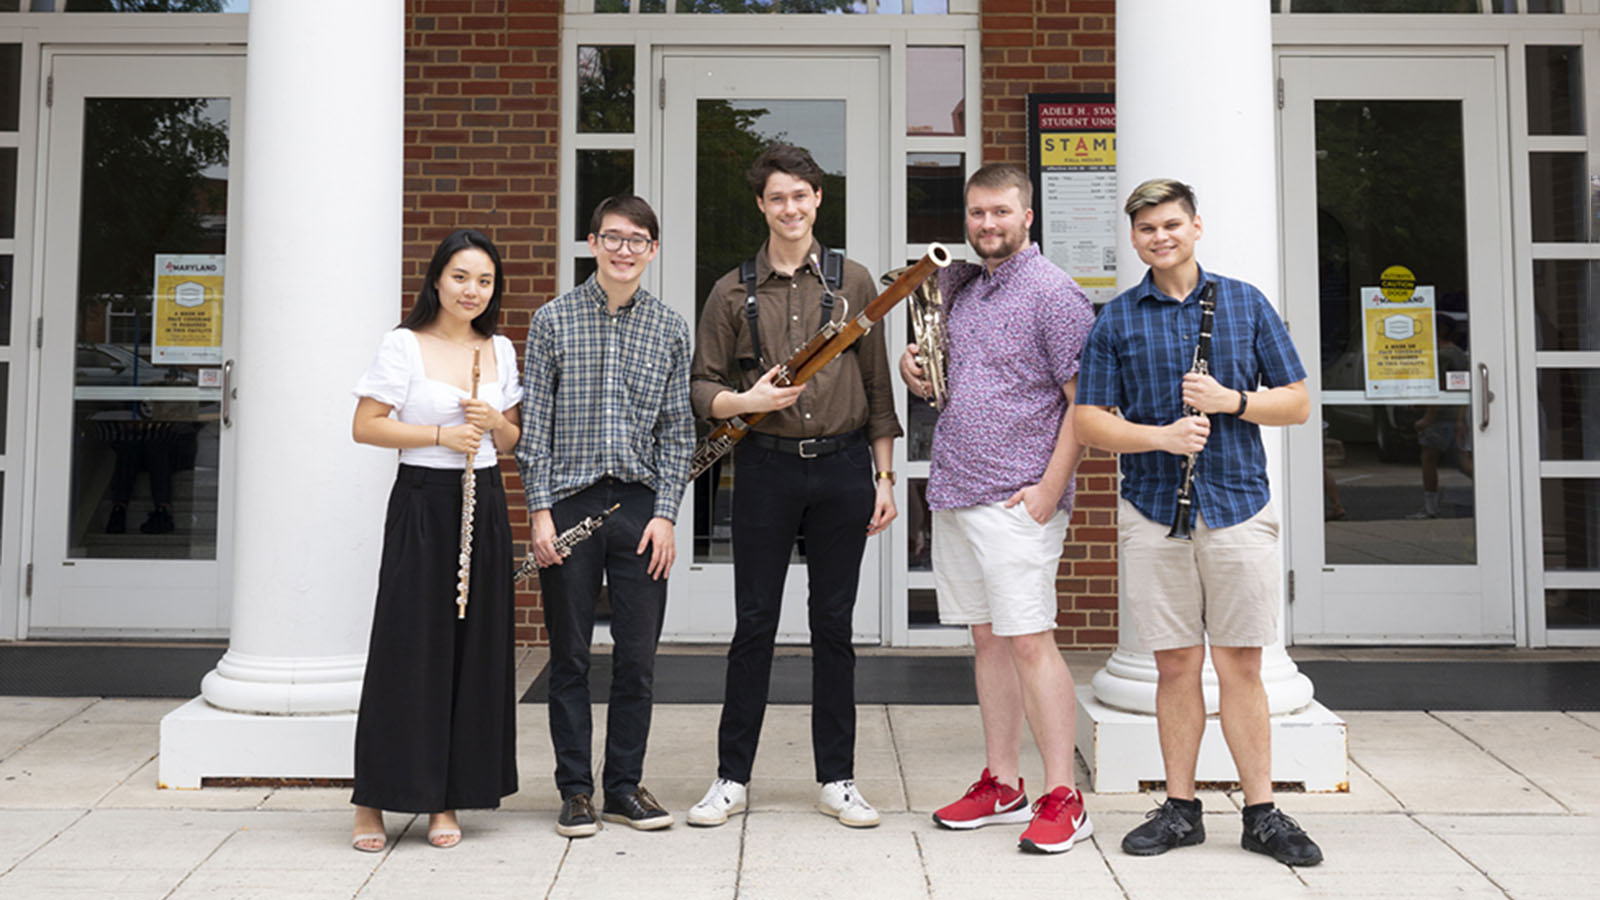 Ignis graduate fellowship woodwind quintet, from left to right: Danielle Kim with a flute, Nathaniel Wolff with an oboe, Christian Whitacre with a bassoon, Zachary Miller with a French horn, and Kyle Glasgow with a clarinet.